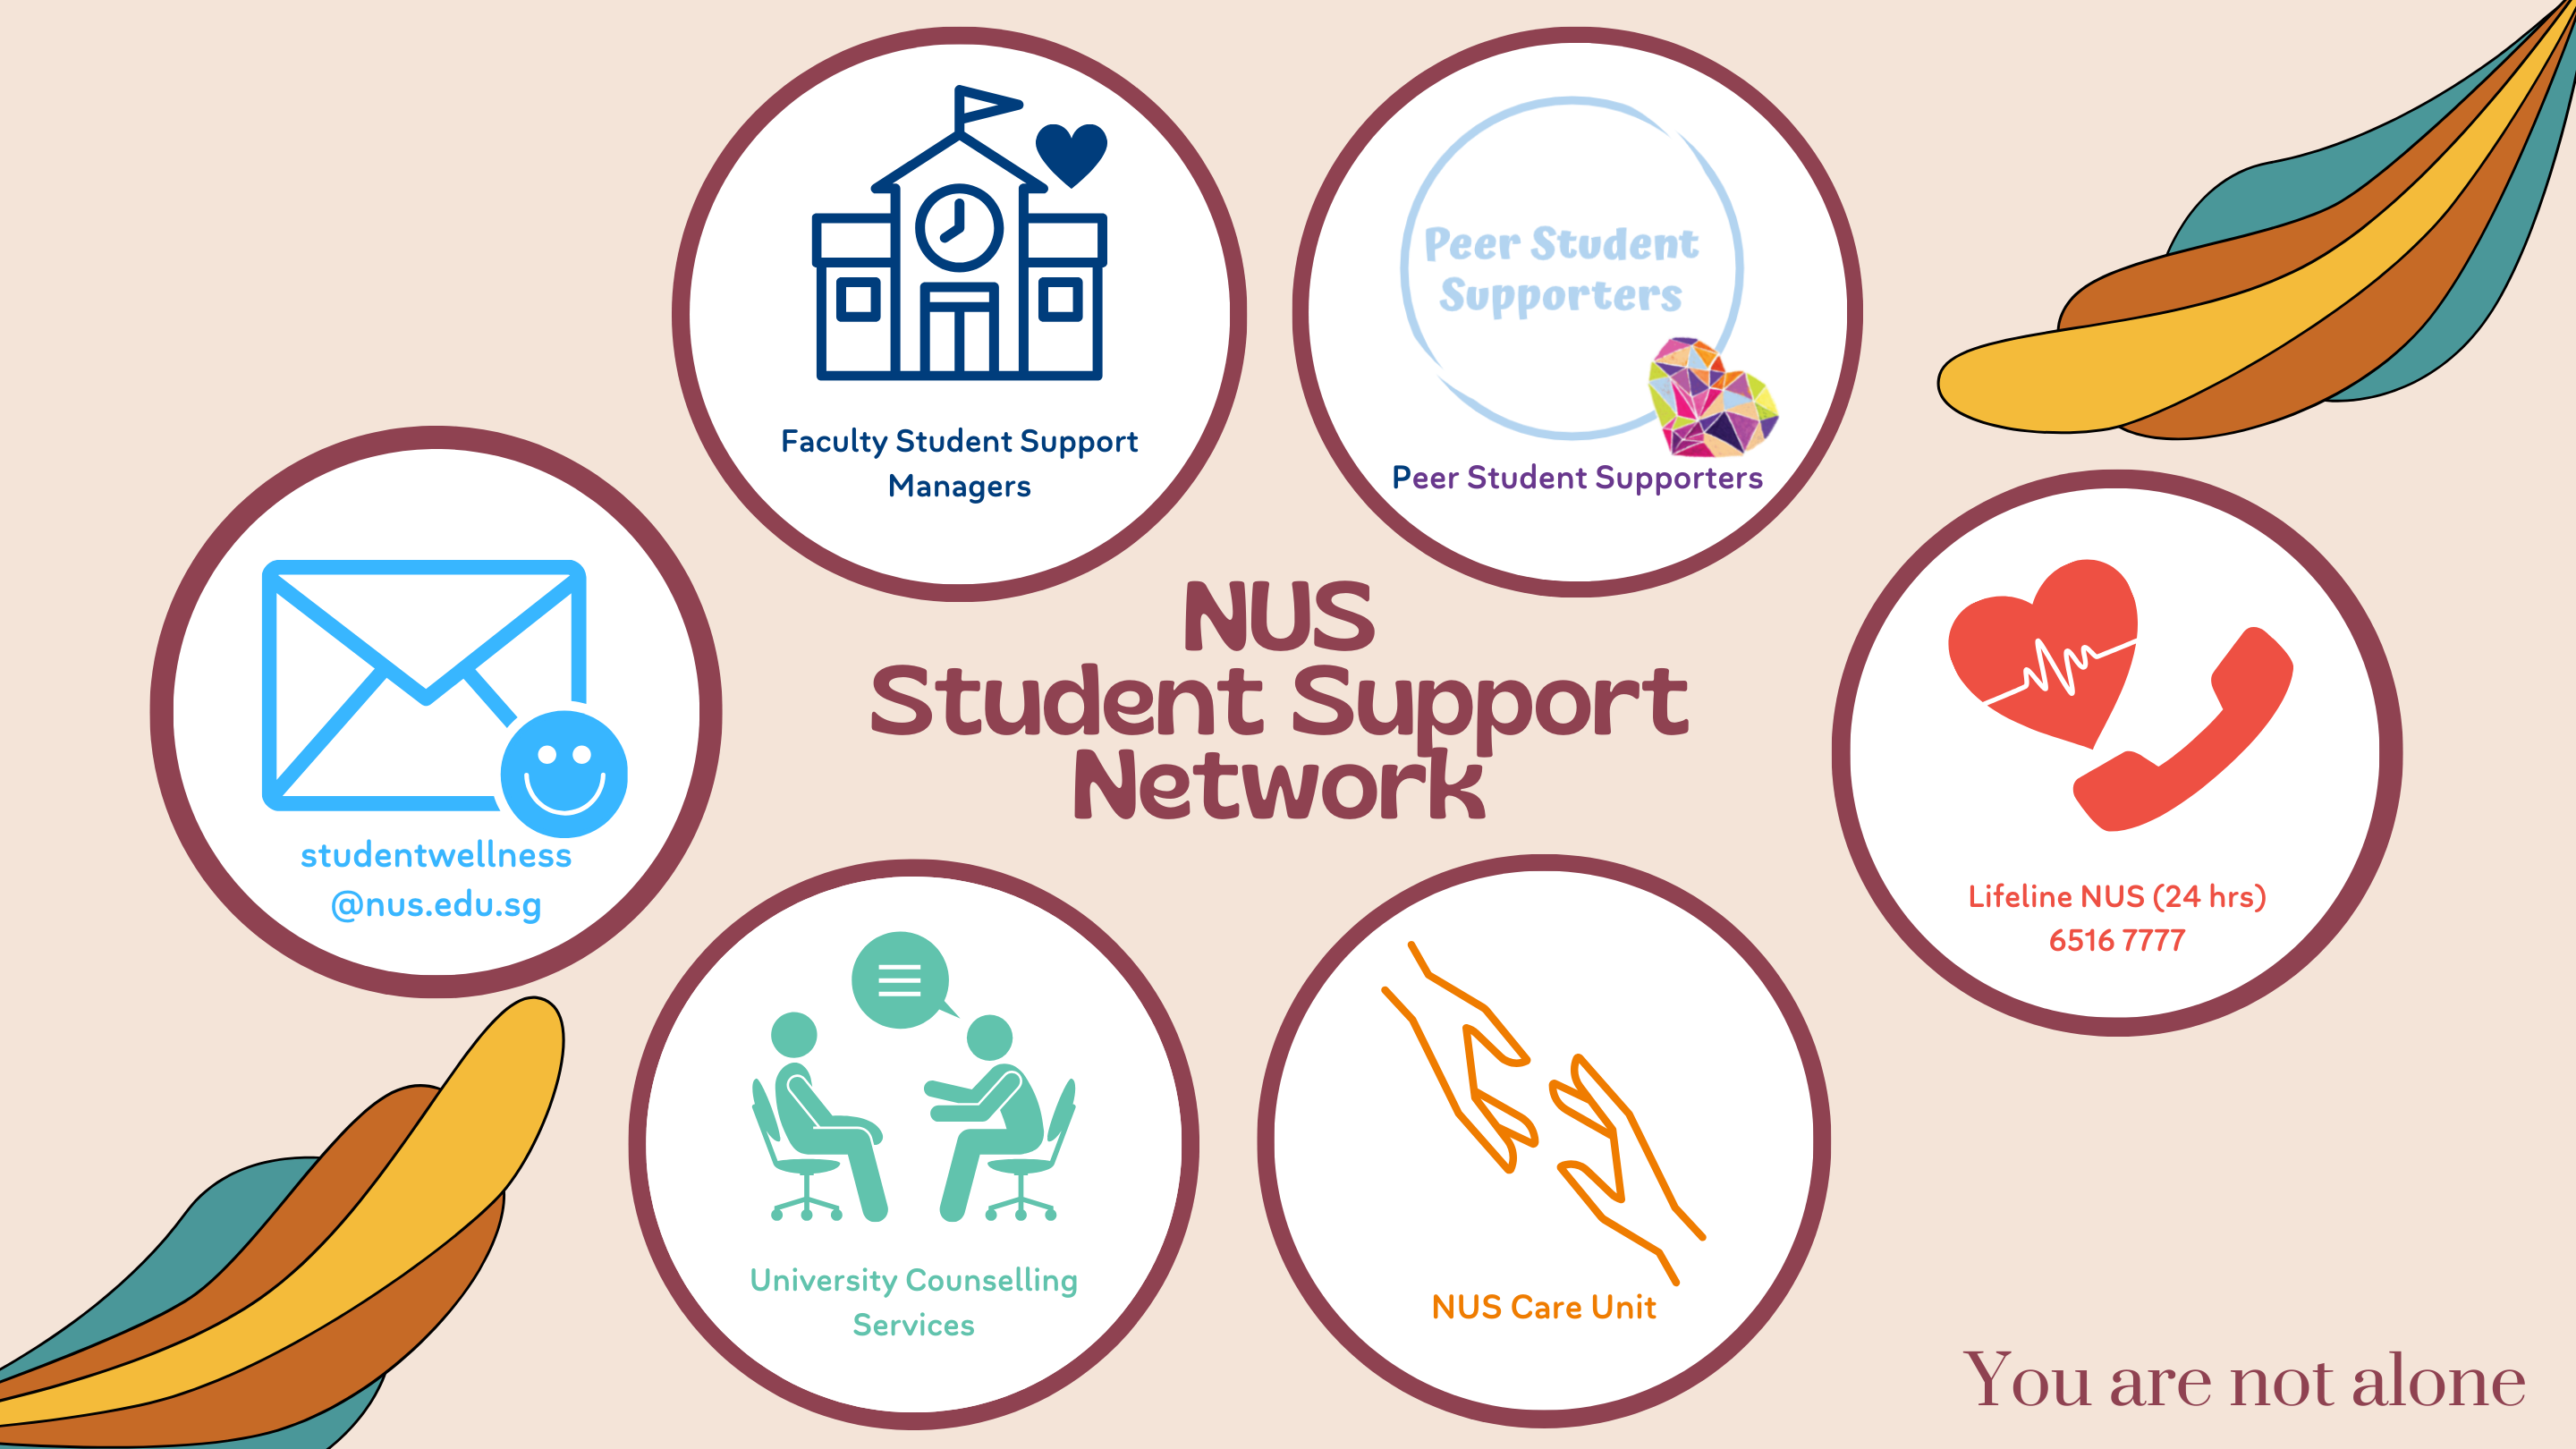 NUS Student Support Network